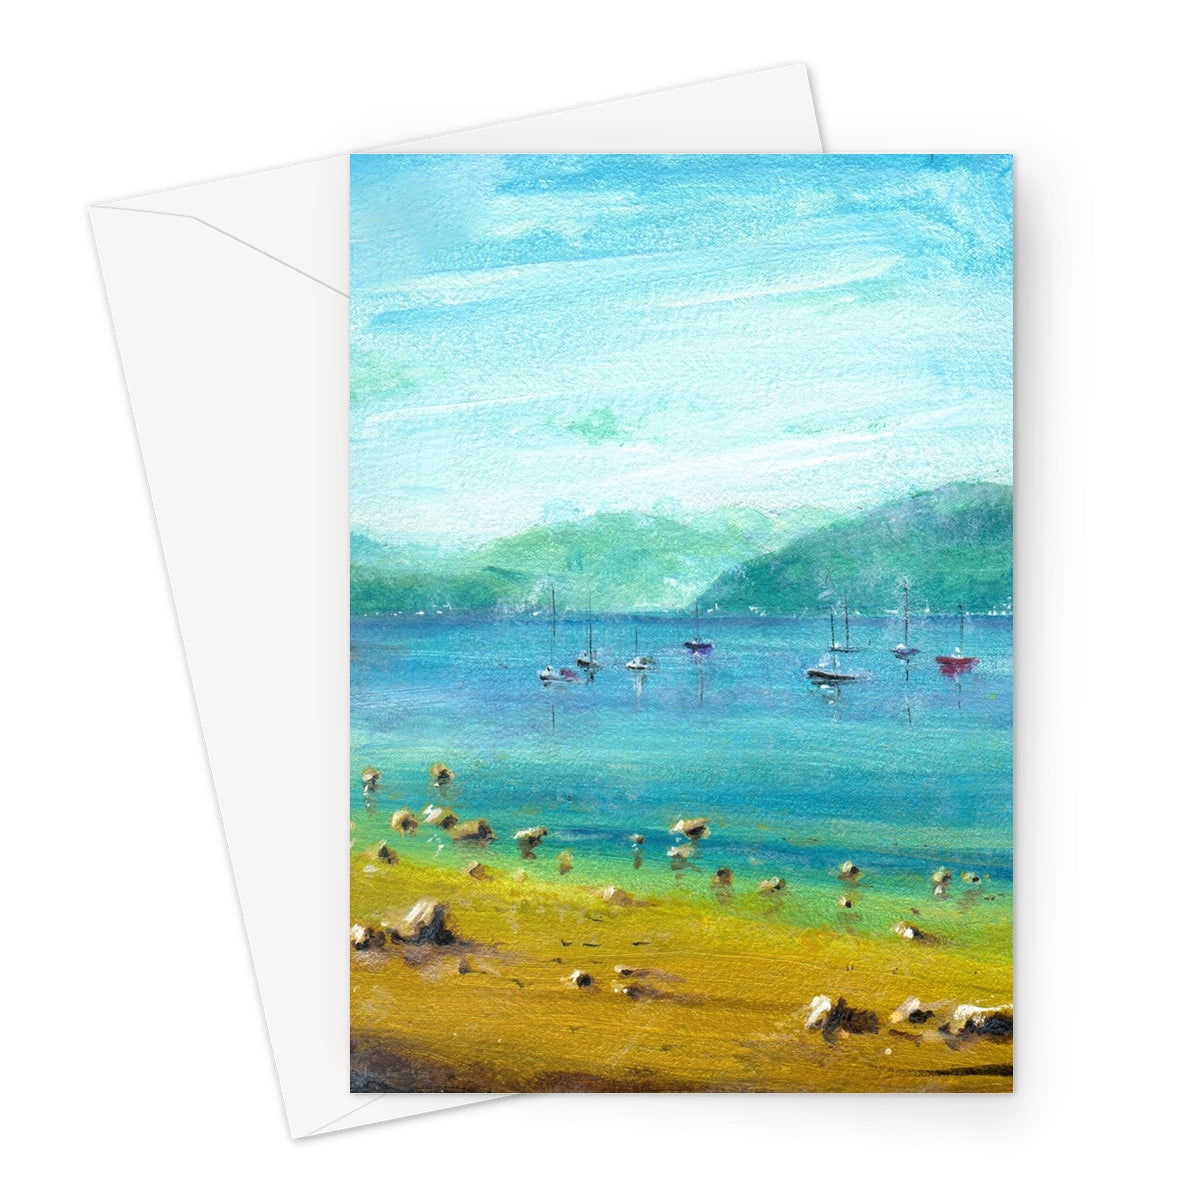 A Clyde Summer Day Art Gifts Greeting Card